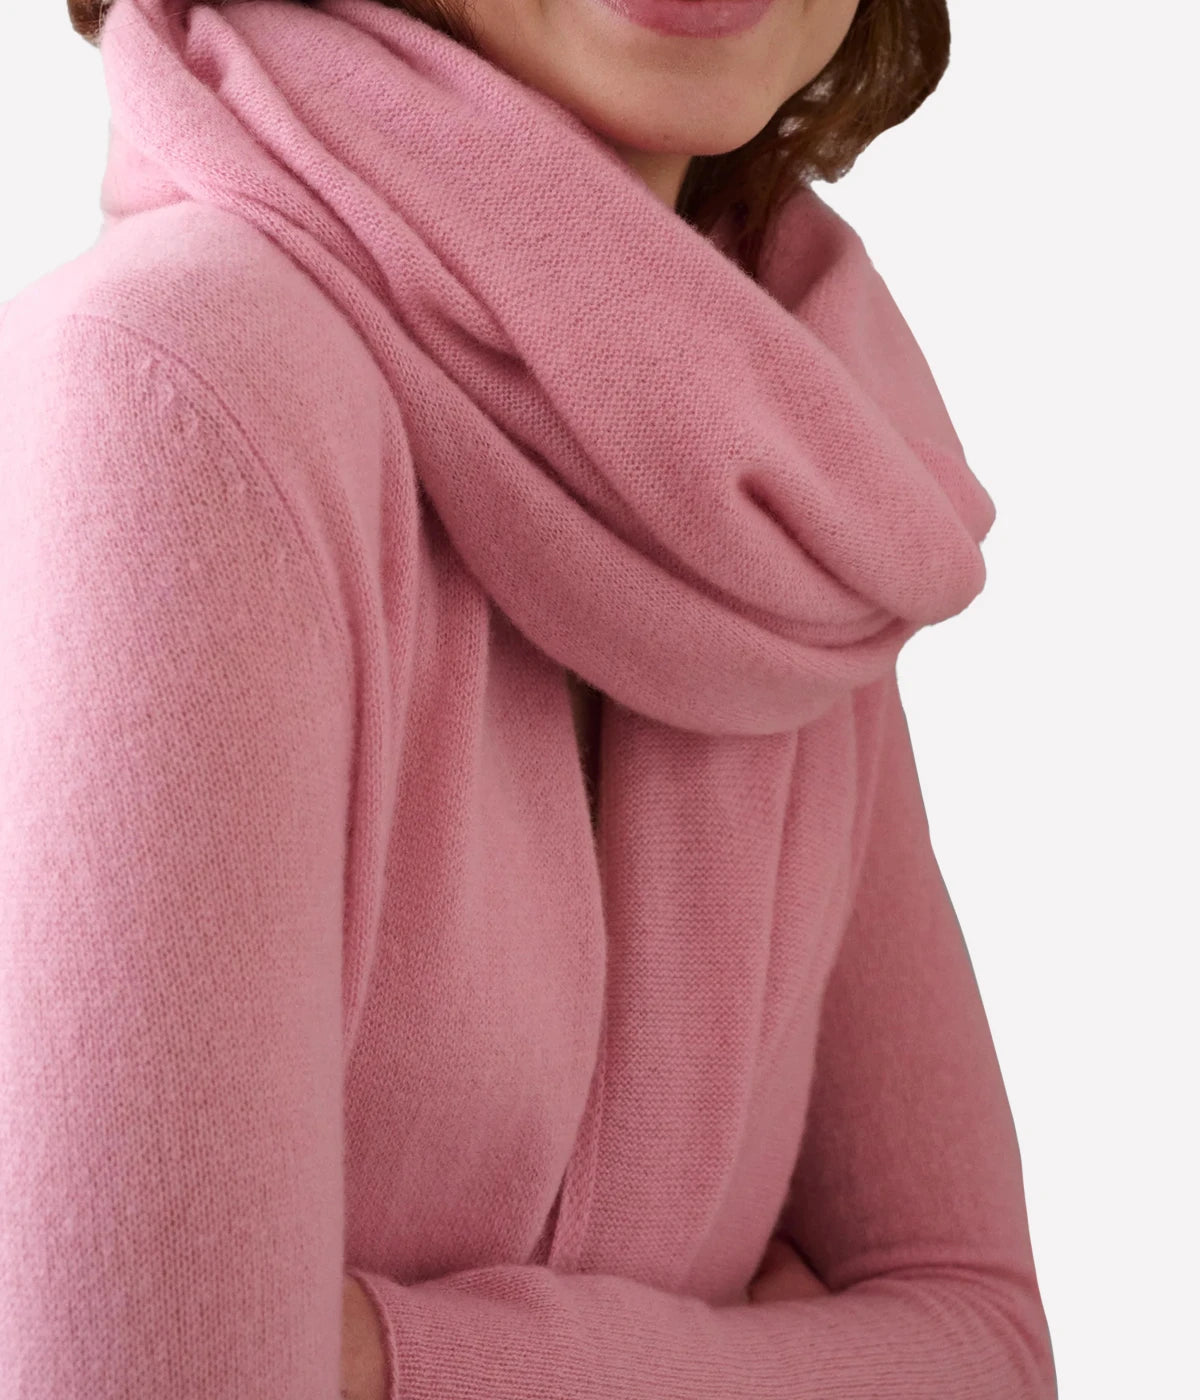 Cashmere Travel Wrap in Pink Sands